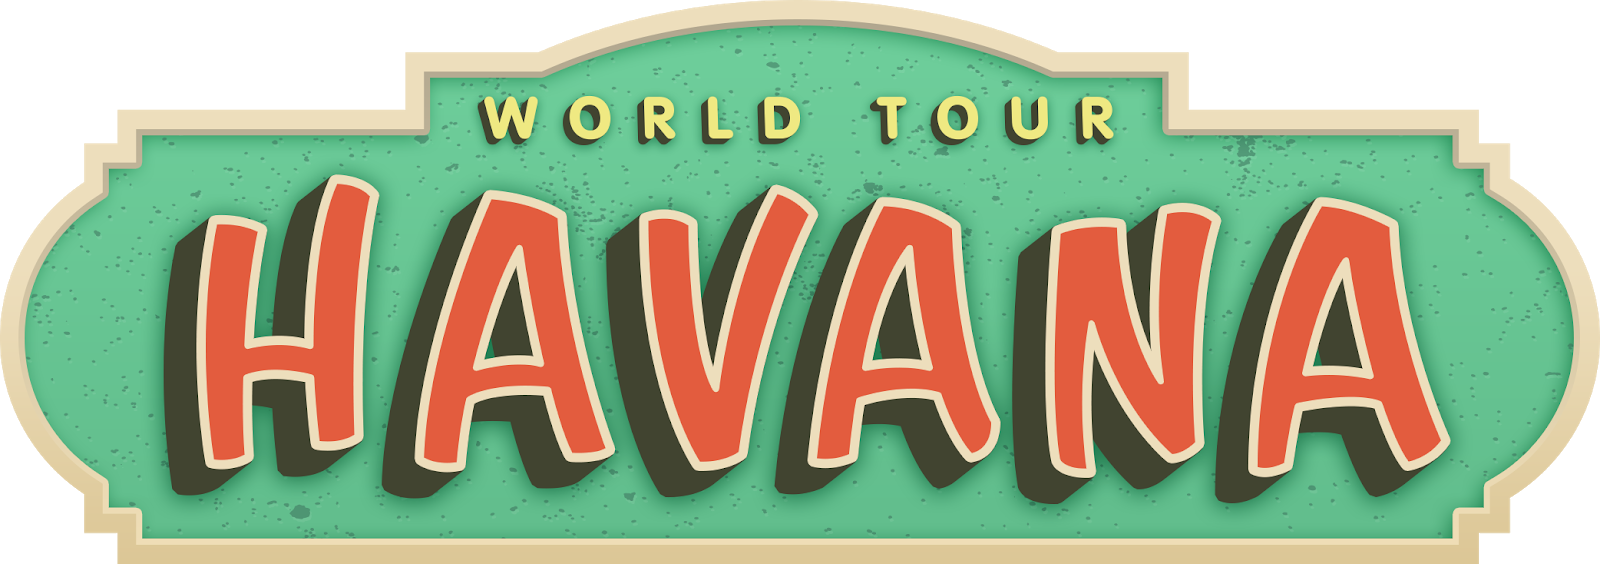 Explore the Vibrant Streets of Havana with Subway Surfers Havana Mod APK  🇨🇺, Sub Surfers APK posted on the topic